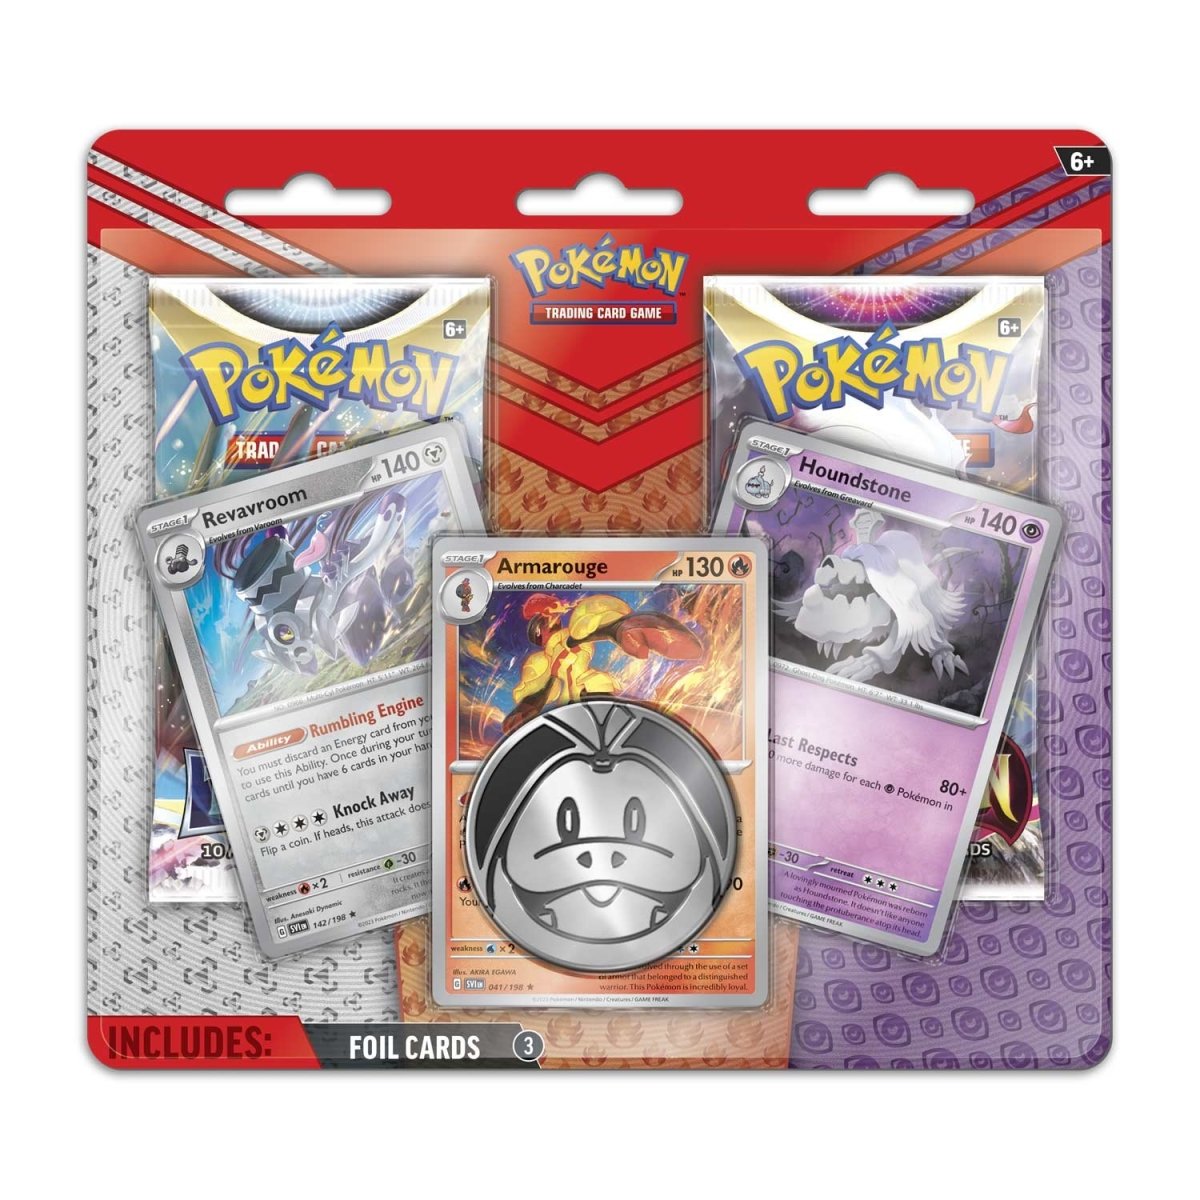 Pokémon TCG: Armarouge, Revavroom & Houndstone Cards with 2 Booster Packs &  Coin